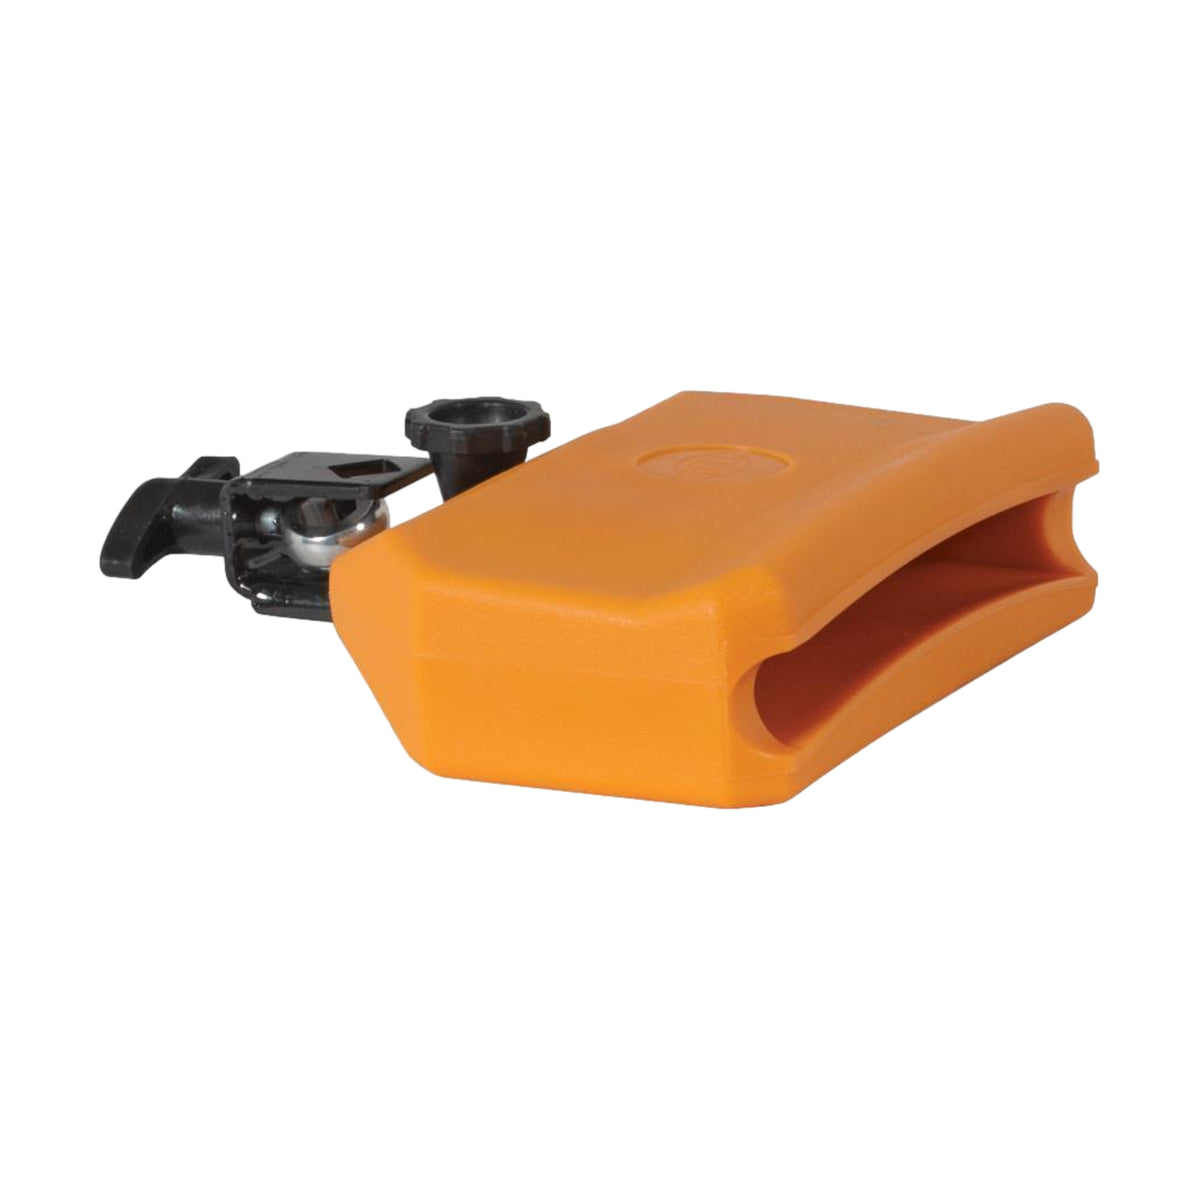 Mano Percussion Low Pitch Gig Block Orange with Mount